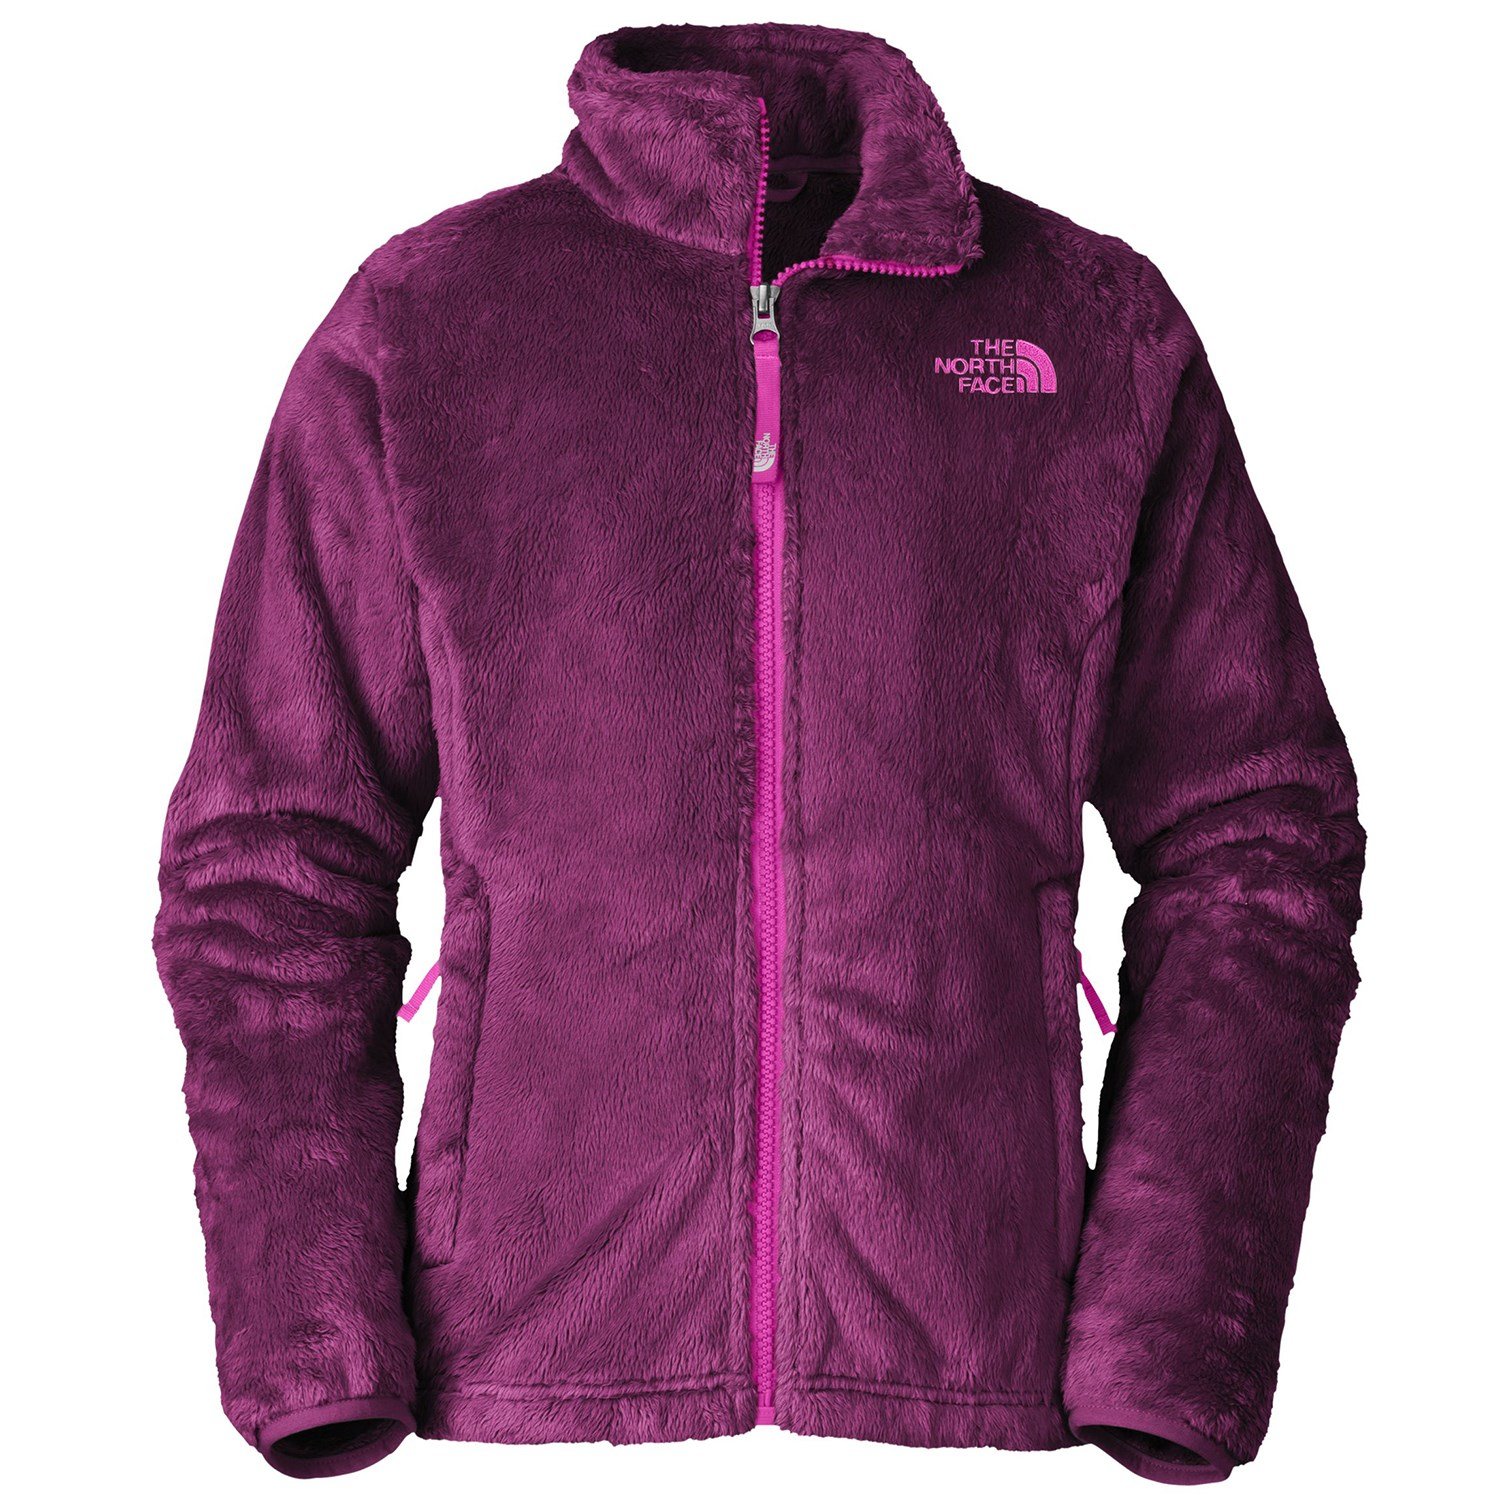 osolita jacket the north face Online 